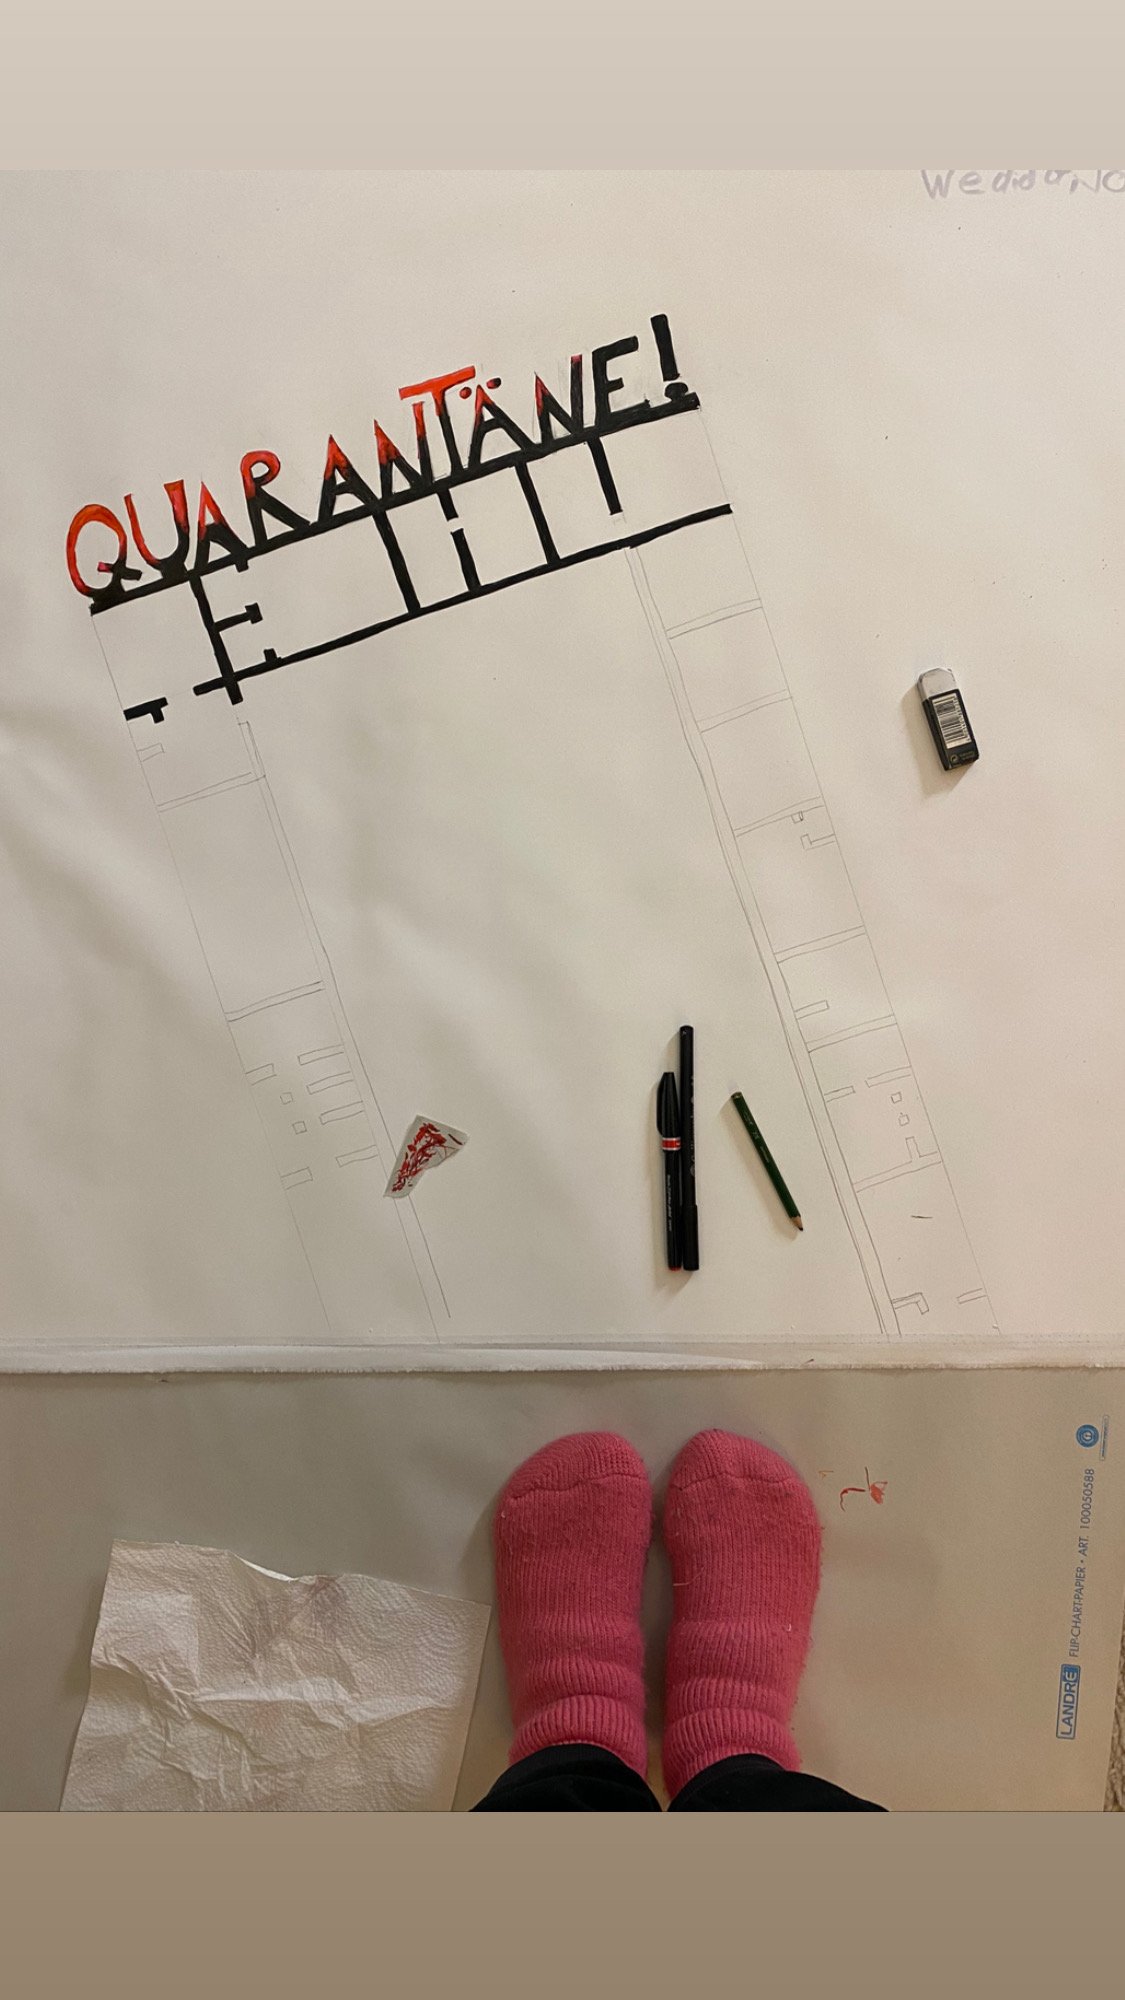 unfinished drawing from Simone about quarantine